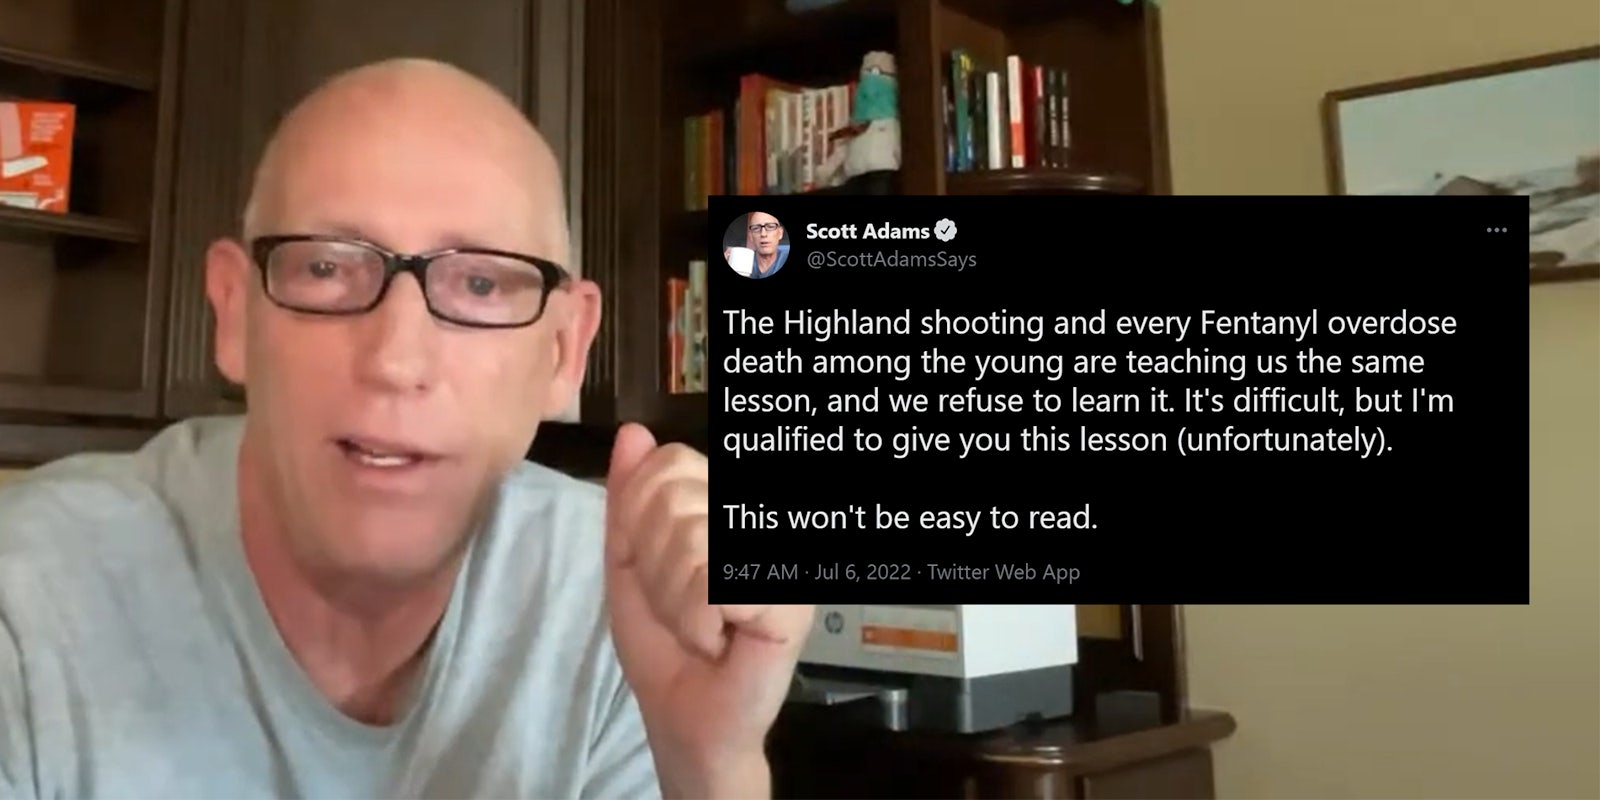 scott adams with tweet that reads 'The Highland shooting and every Fentanyl overdose death among the young are teaching us the same lesson, and we refuse to learn it. It's difficult, but I'm qualified to give you this lesson (unfortunately). This won't be easy to read.'